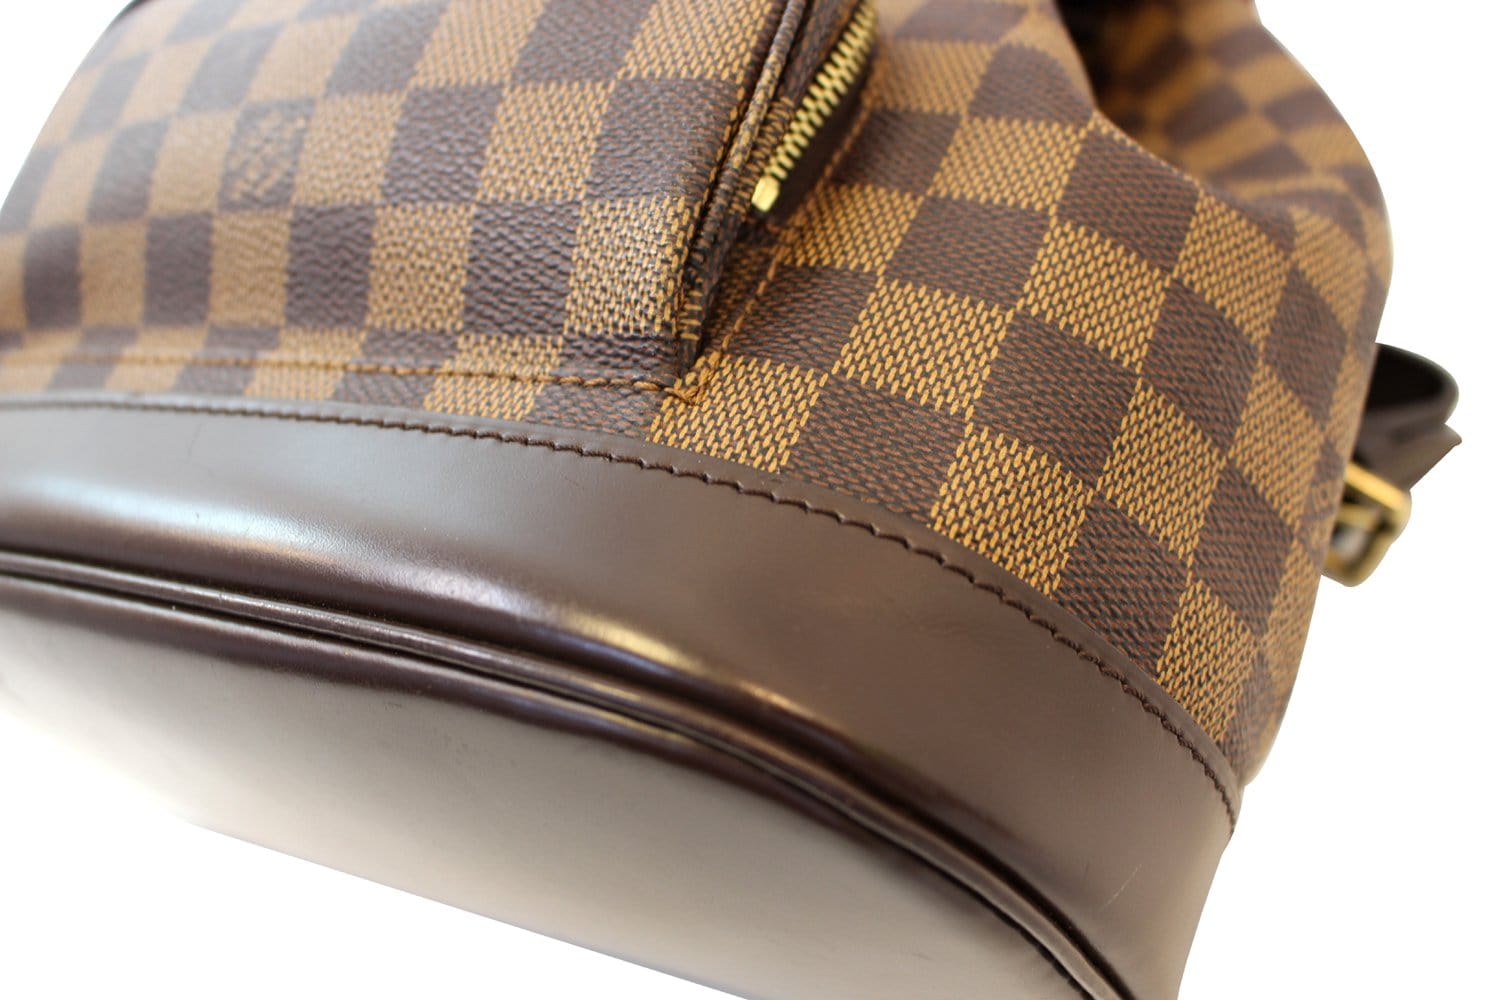 louis vuitton backpack checkered brown